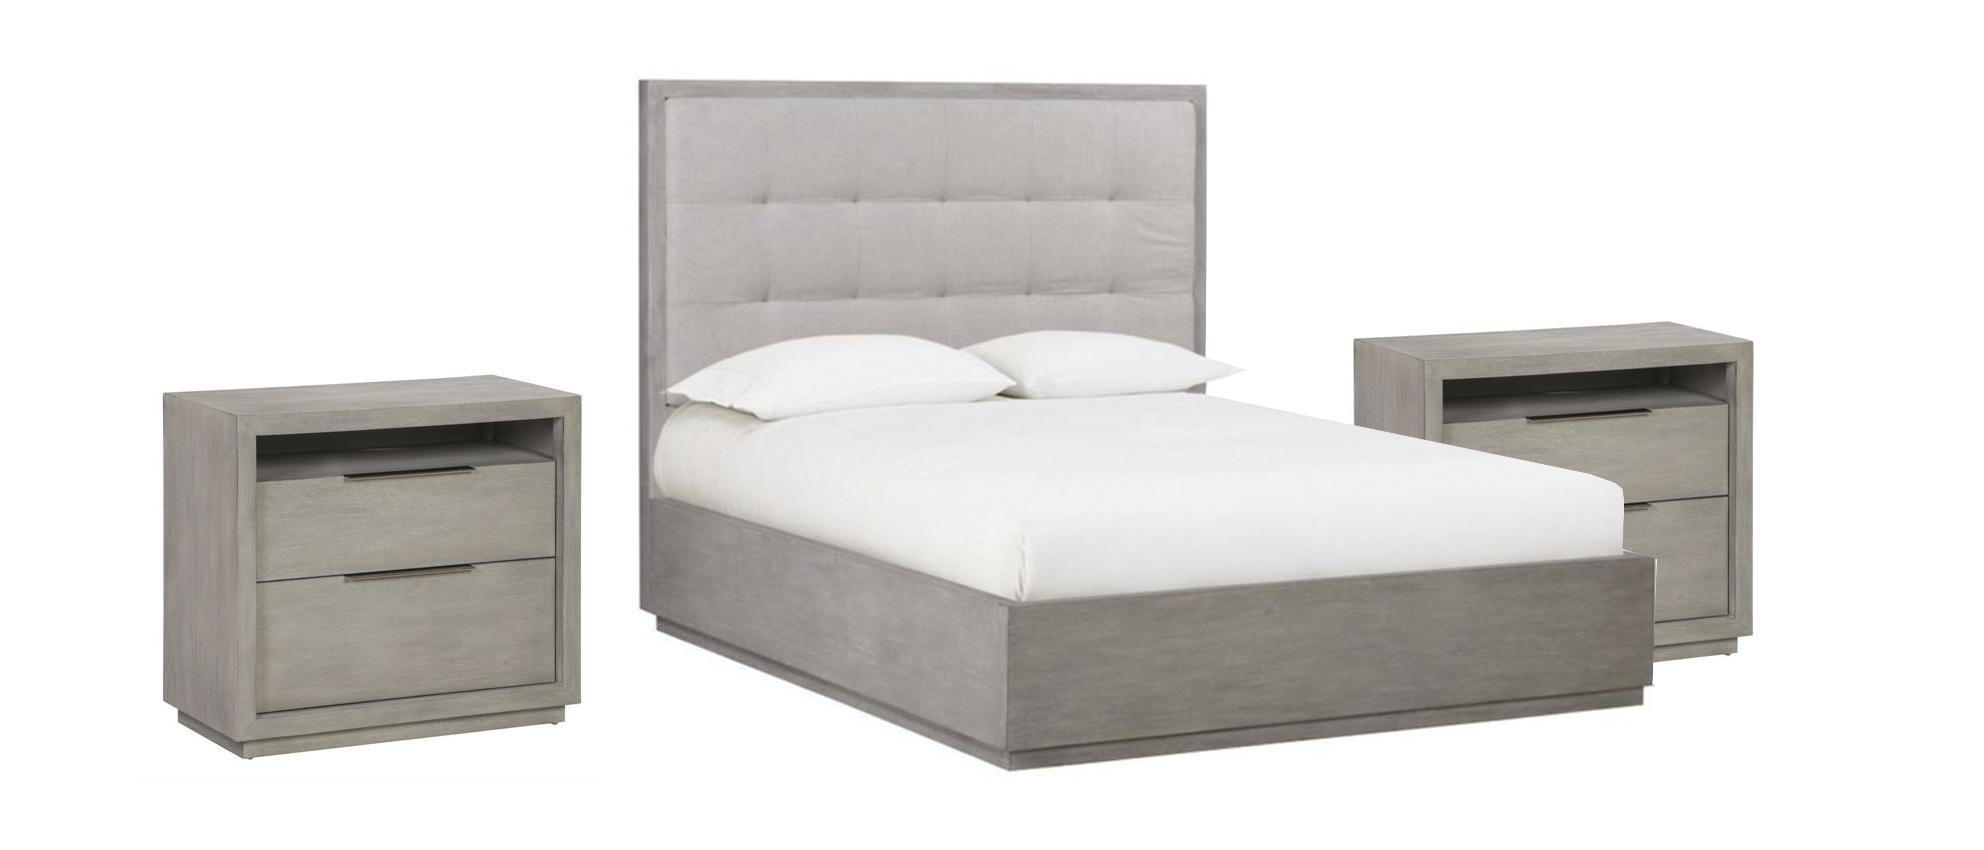 Contemporary Storage Bedroom Set OXFORD STORAGE AZBXS5-2N-3PC in Light Gray, Stone Fabric